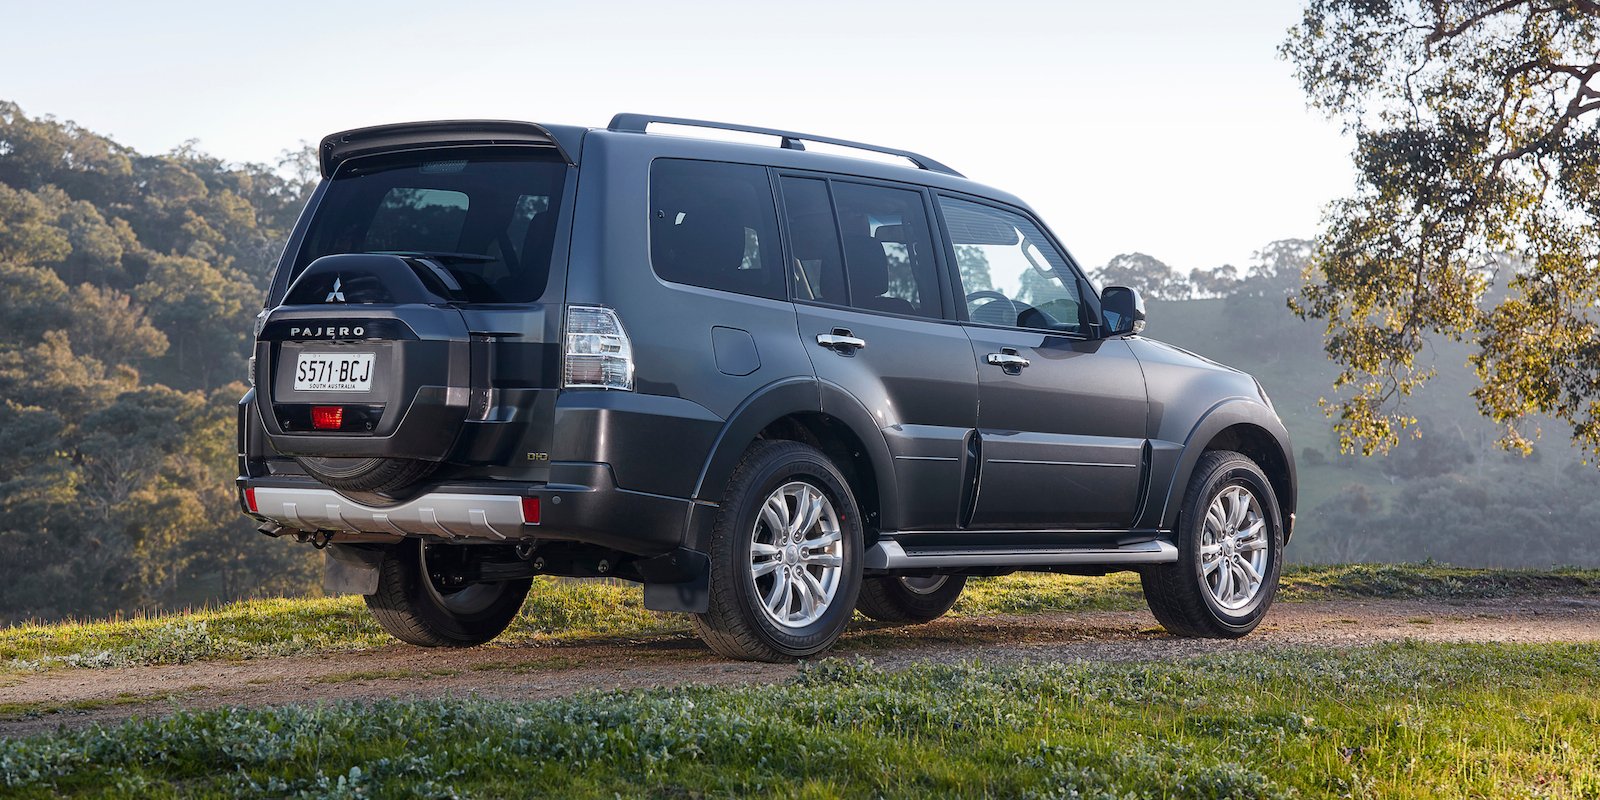 2015 Mitsubishi Pajero pricing and specifications Photos